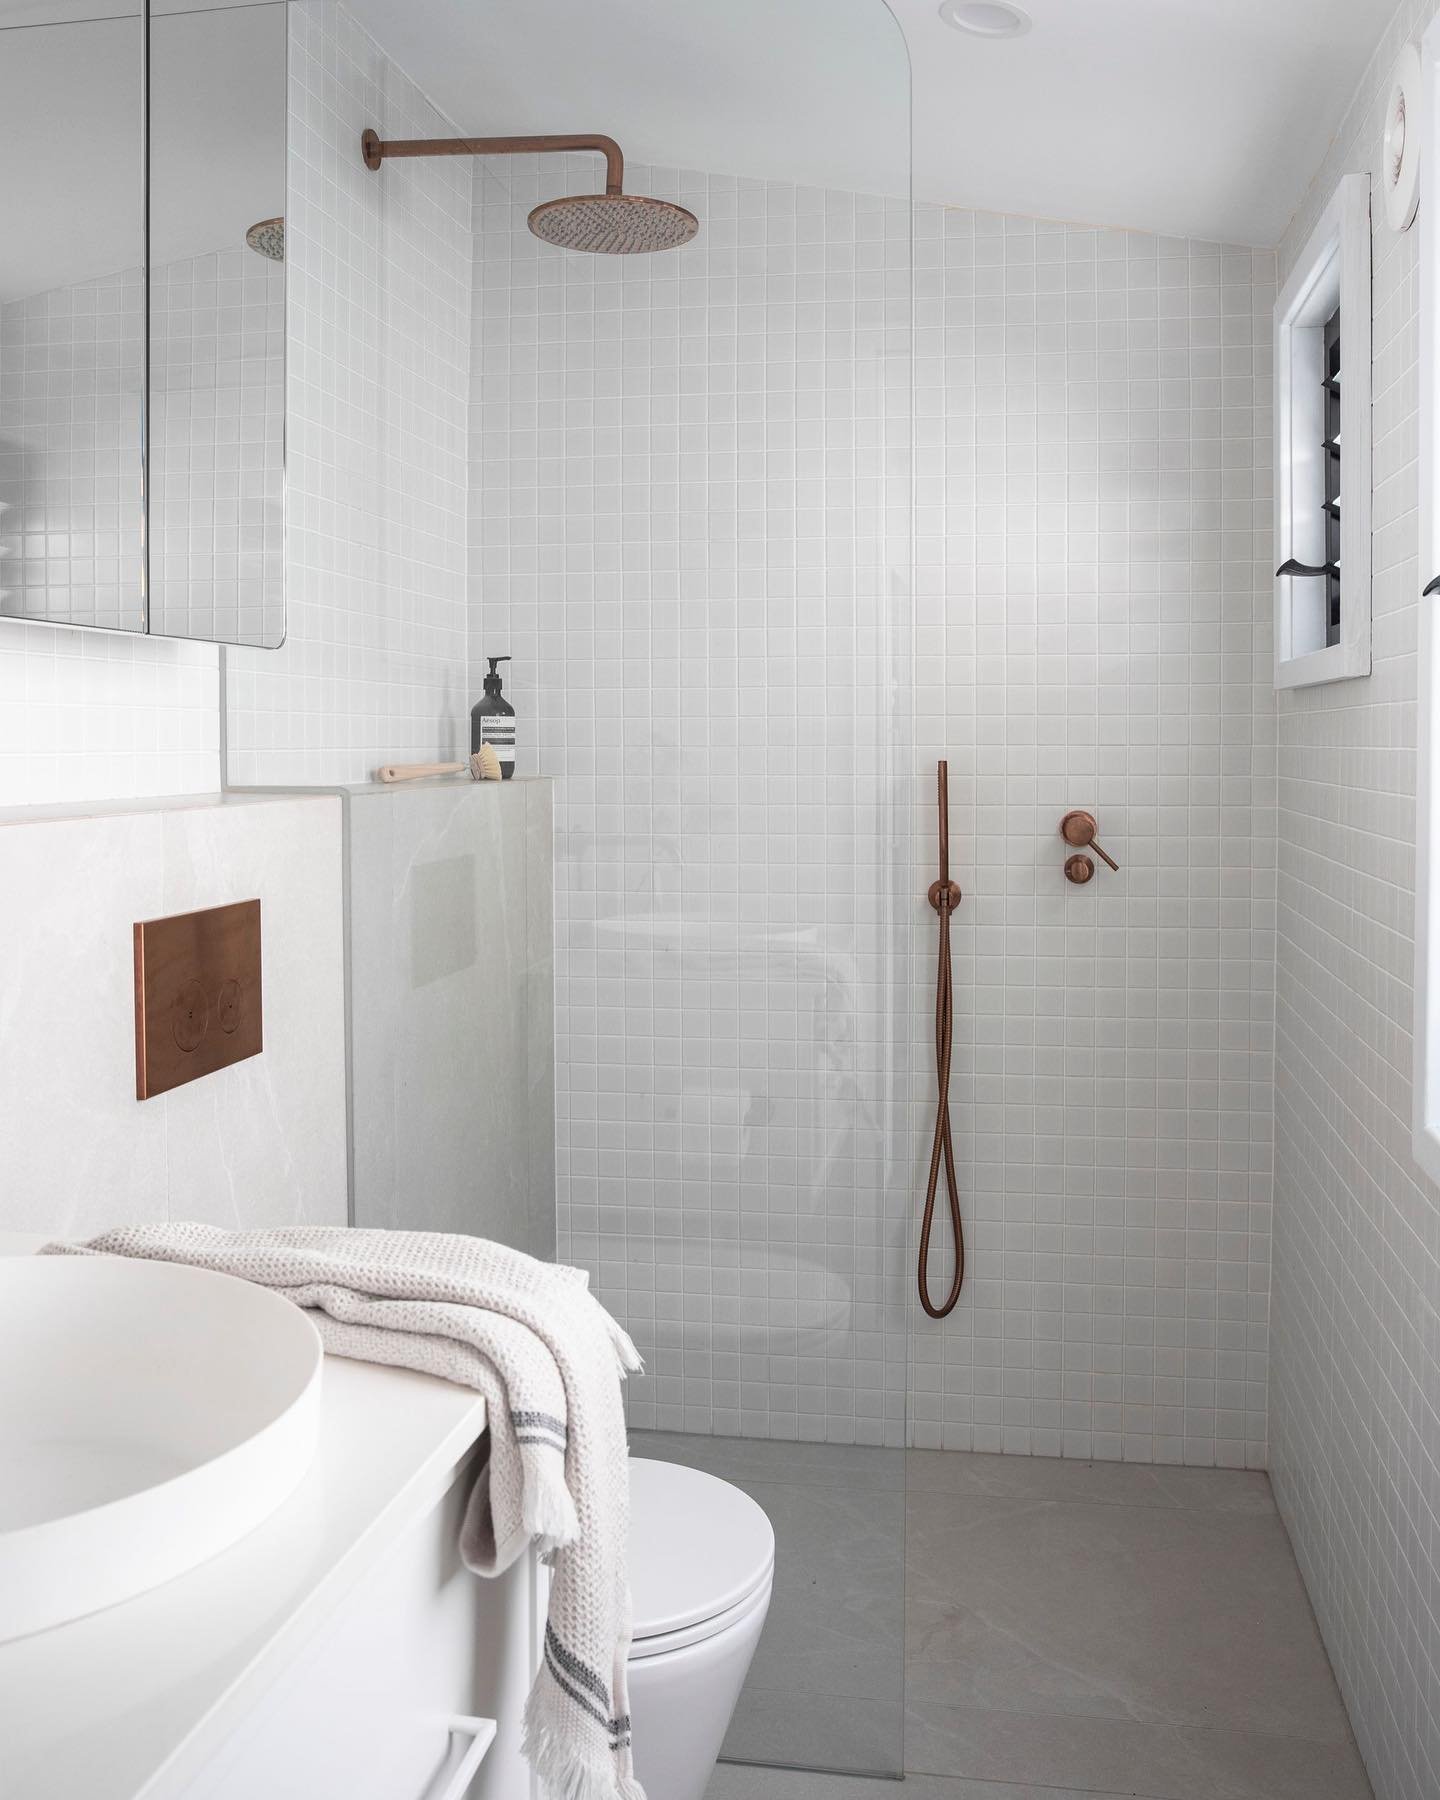 BATHROOM BEFORE ⏭️ AFTER 

&bull;
&bull;
&bull;

The bathroom design was one of the most challenging given it&rsquo;s long, narrow footprint. 

The existing bathroom layout was inefficient, crammed and seriously lacked storage. 

It may seem counteri